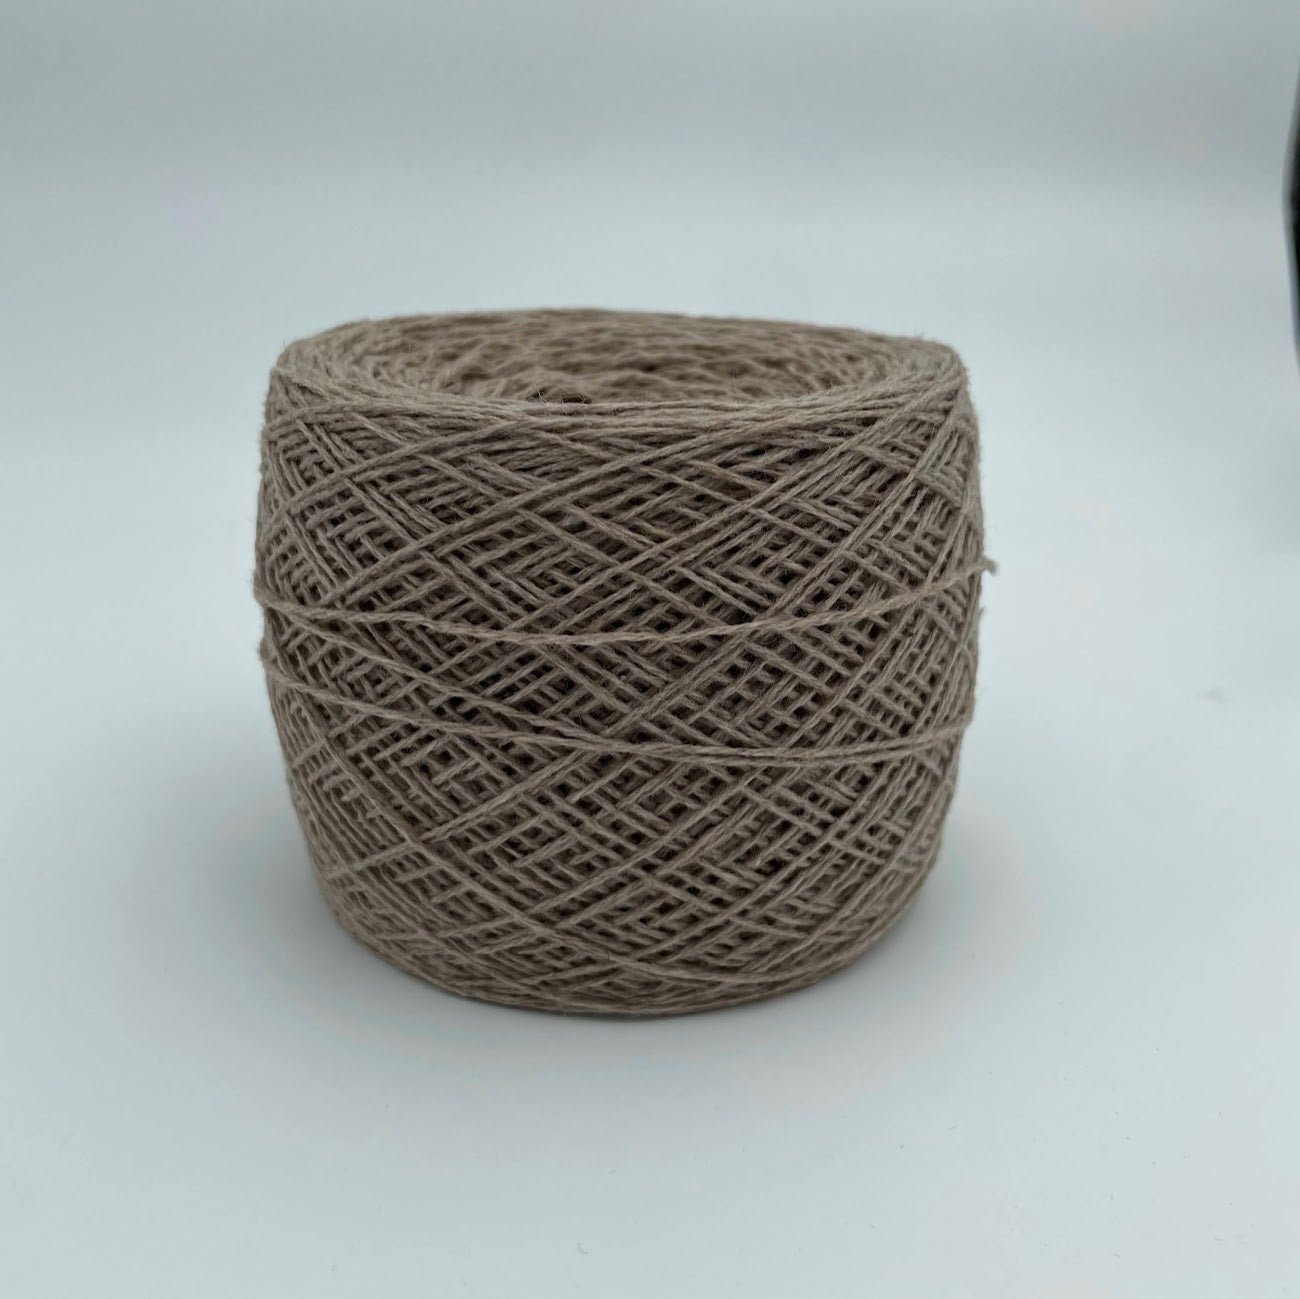 100% Cashmere Yarn - Deadstock Yarn - Made in Italy -  Light Brown - Heavy Lace Weight  - 100g